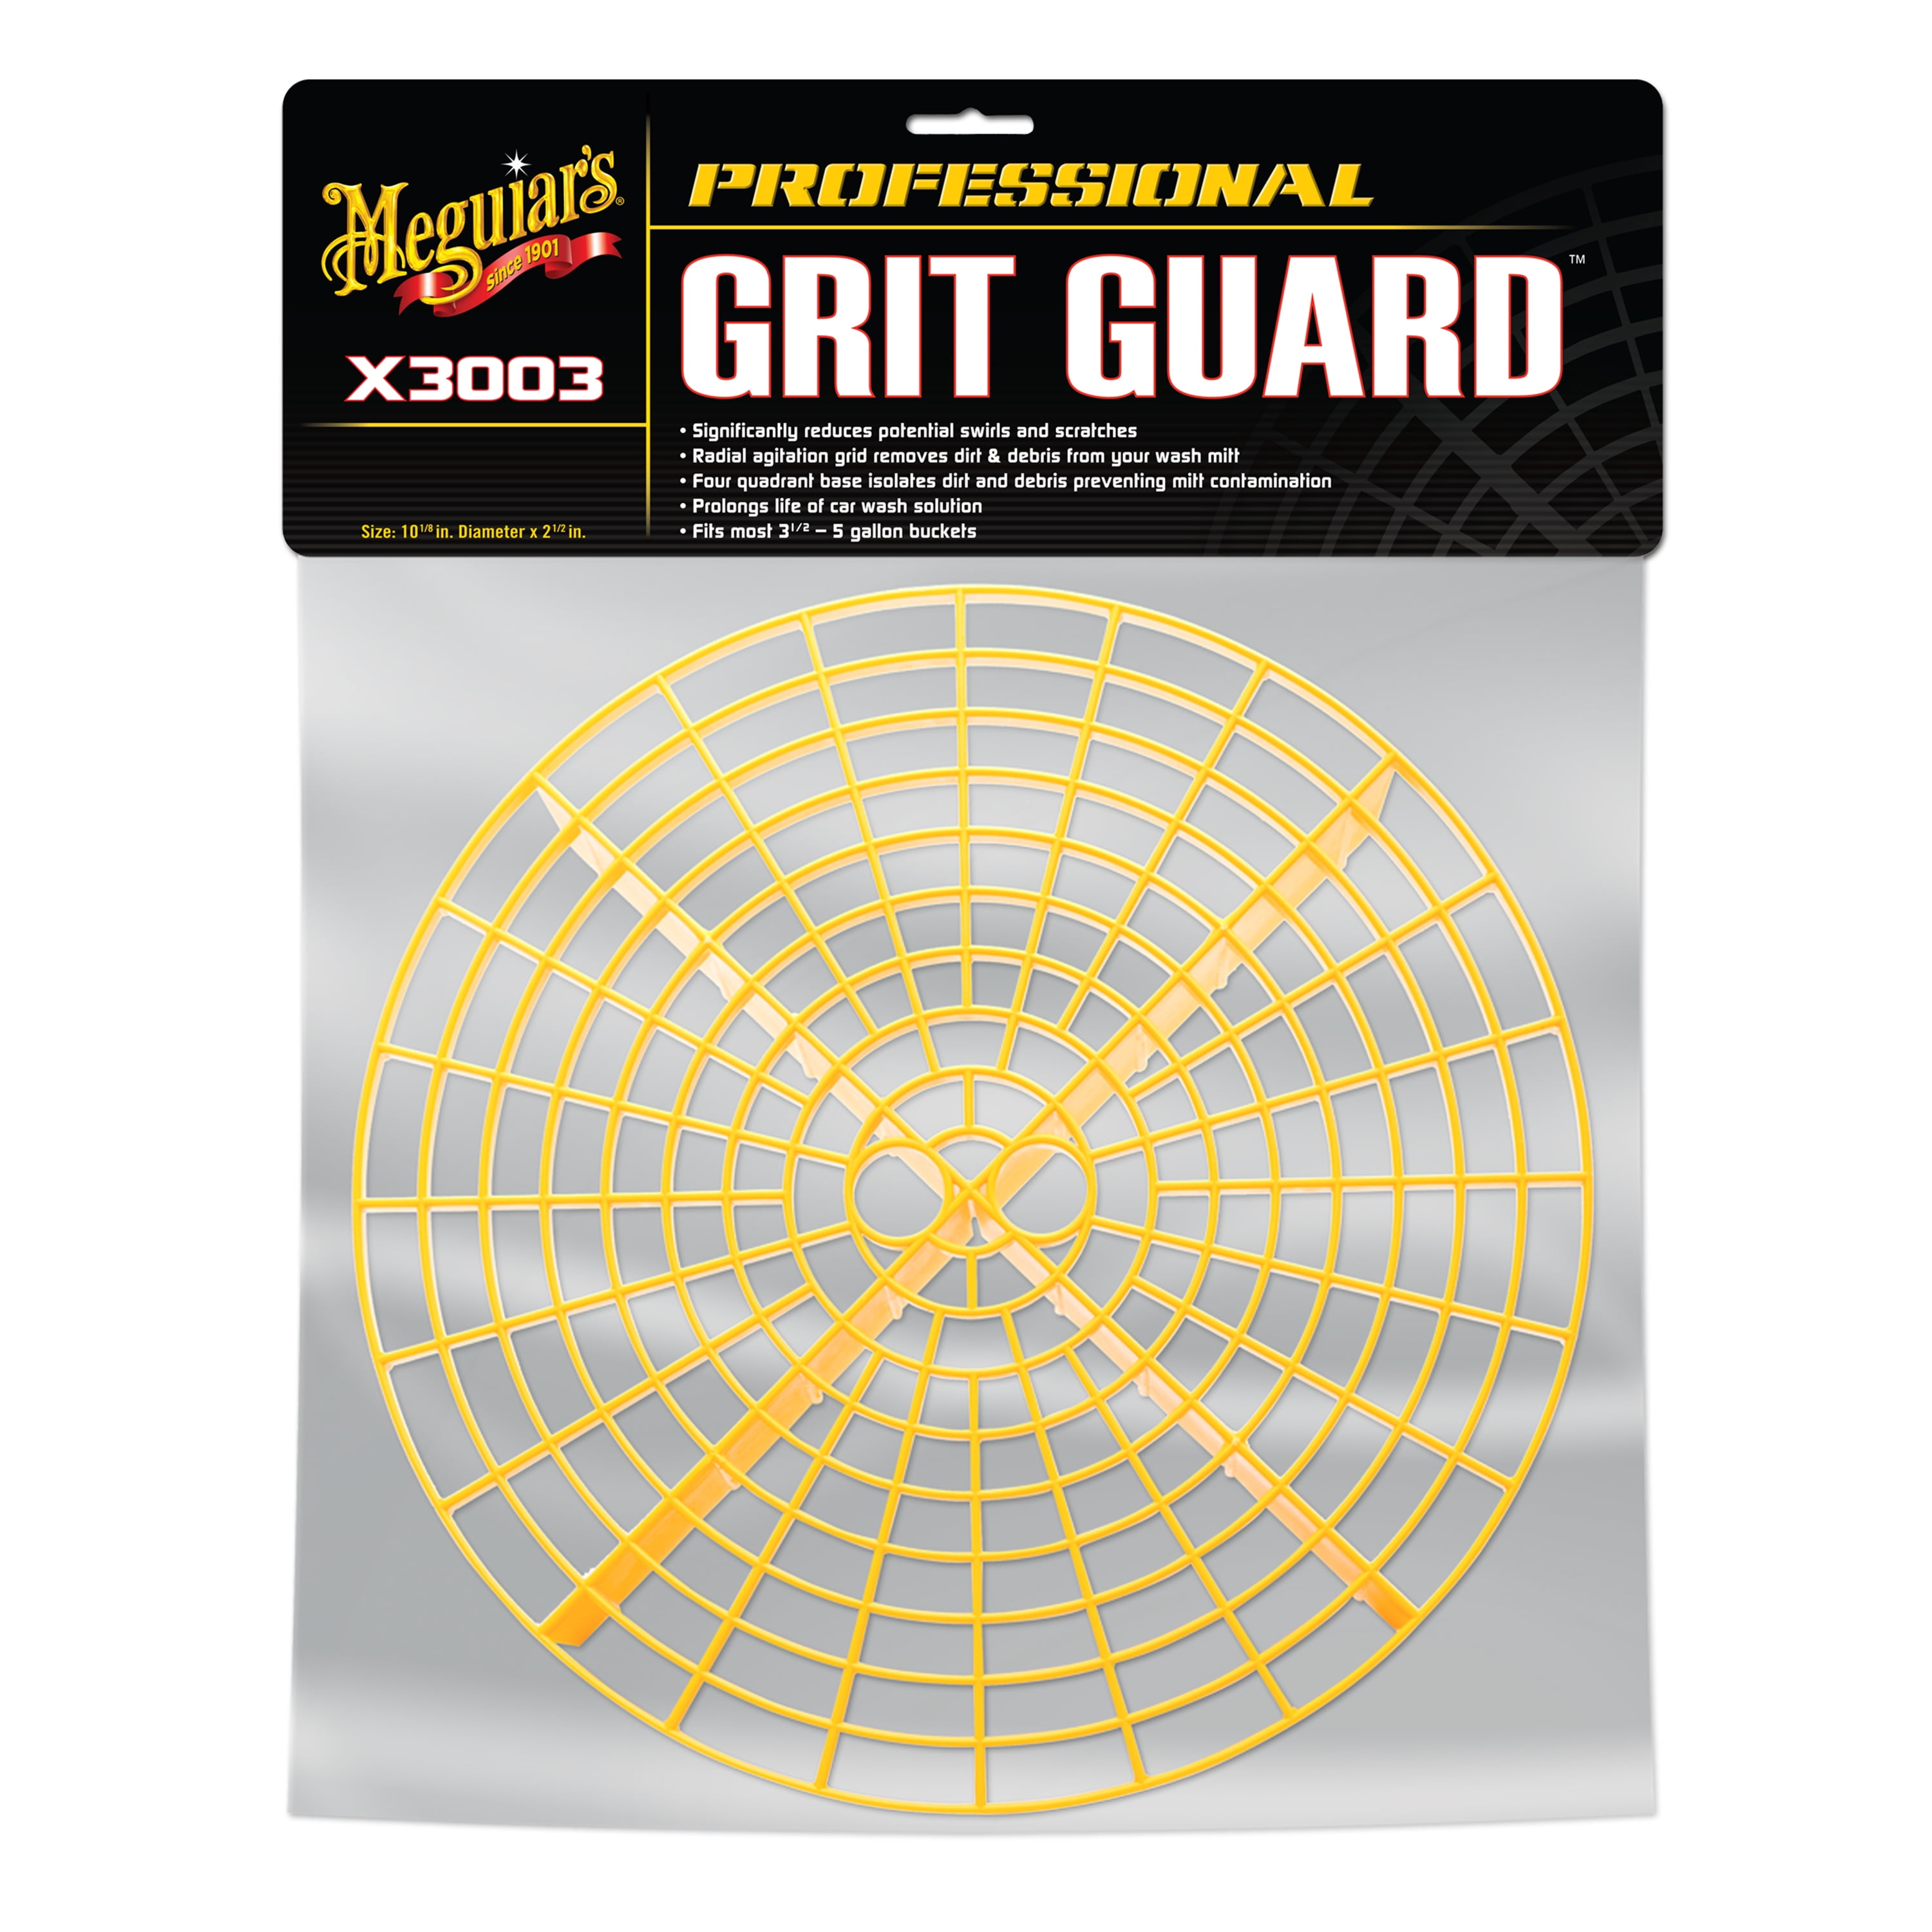 Grit Guard A Must for Your Car - Reduce Swirls & Scratches Blue